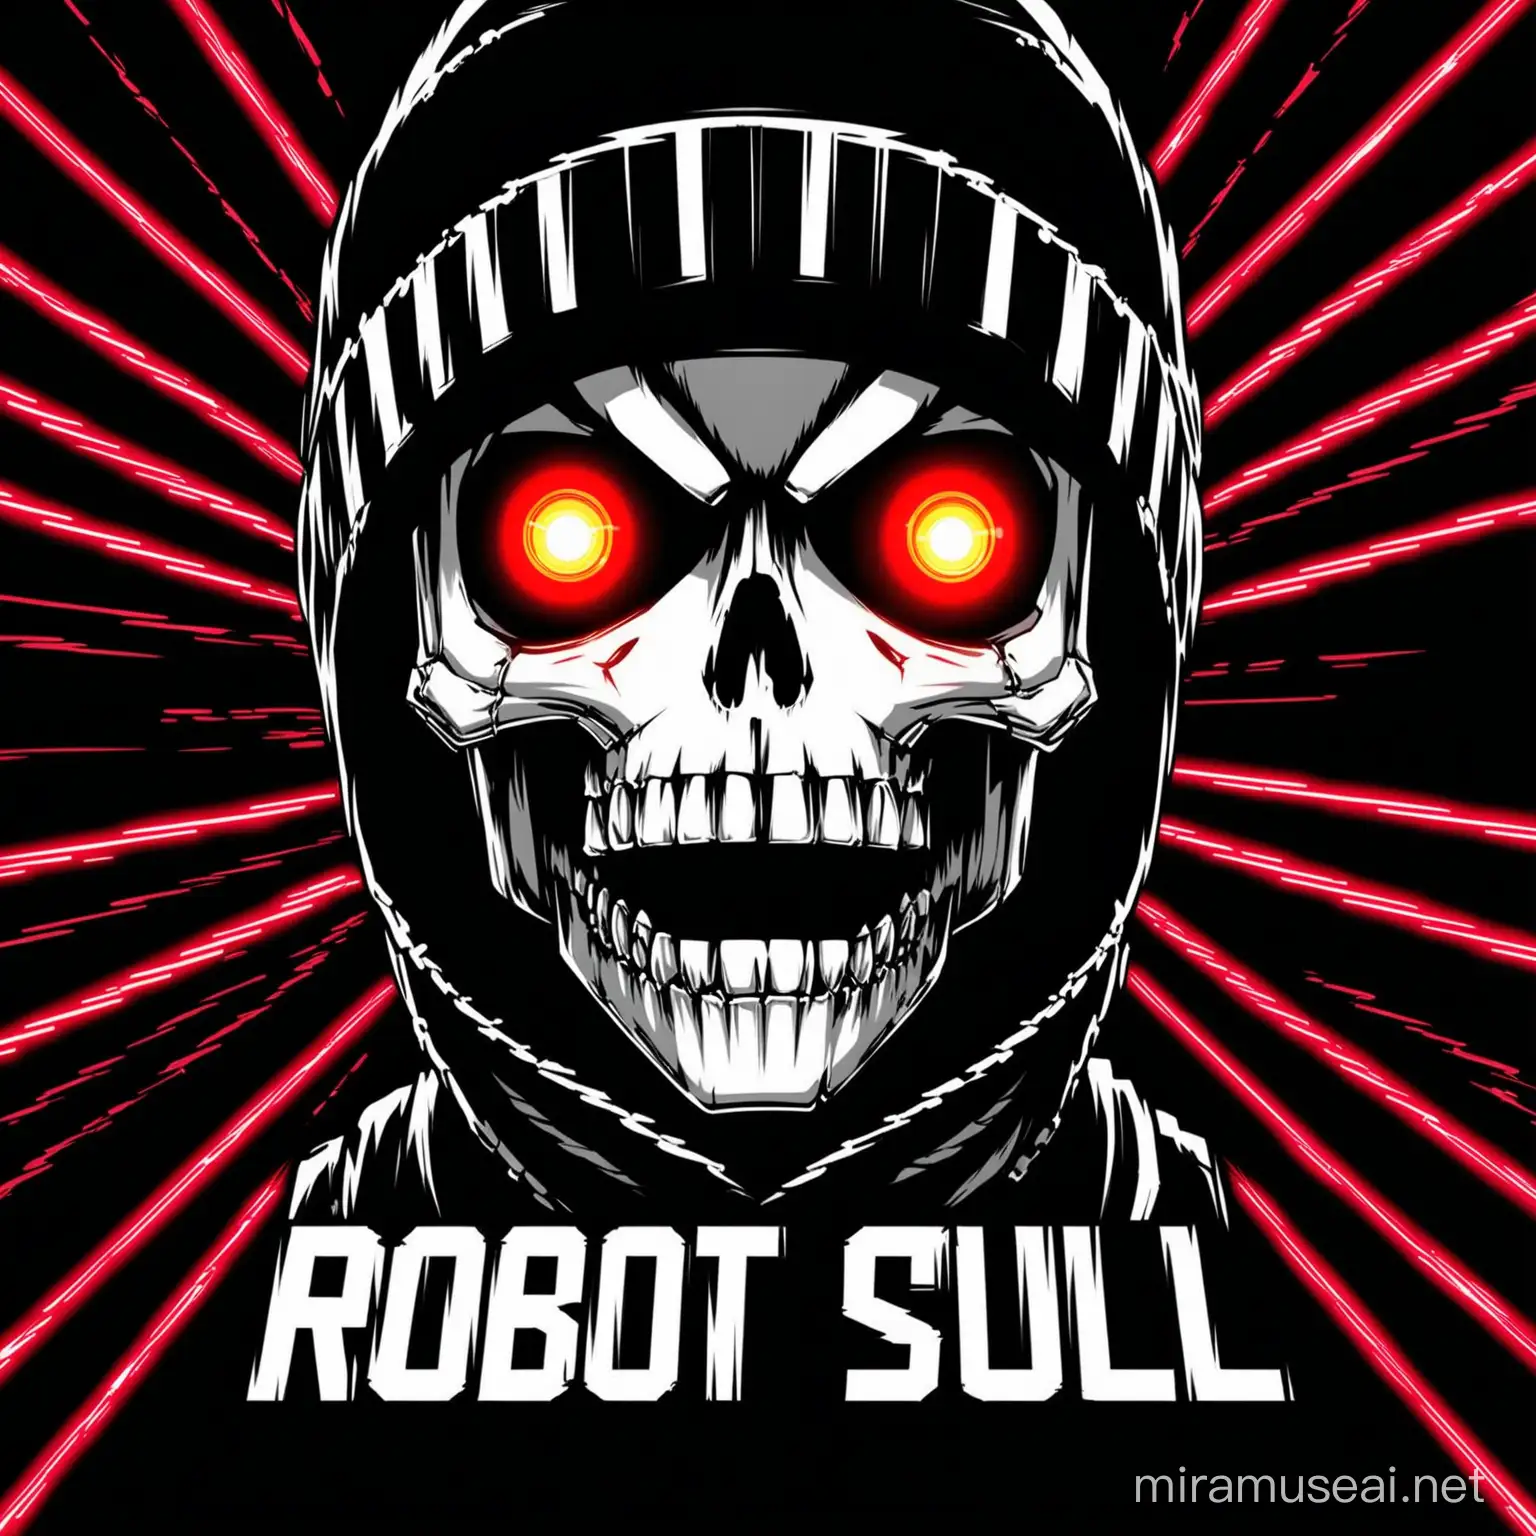 Robot Skull Face with red laser eyes, wearing black and white beanie, mouth open, black background with anime text style.